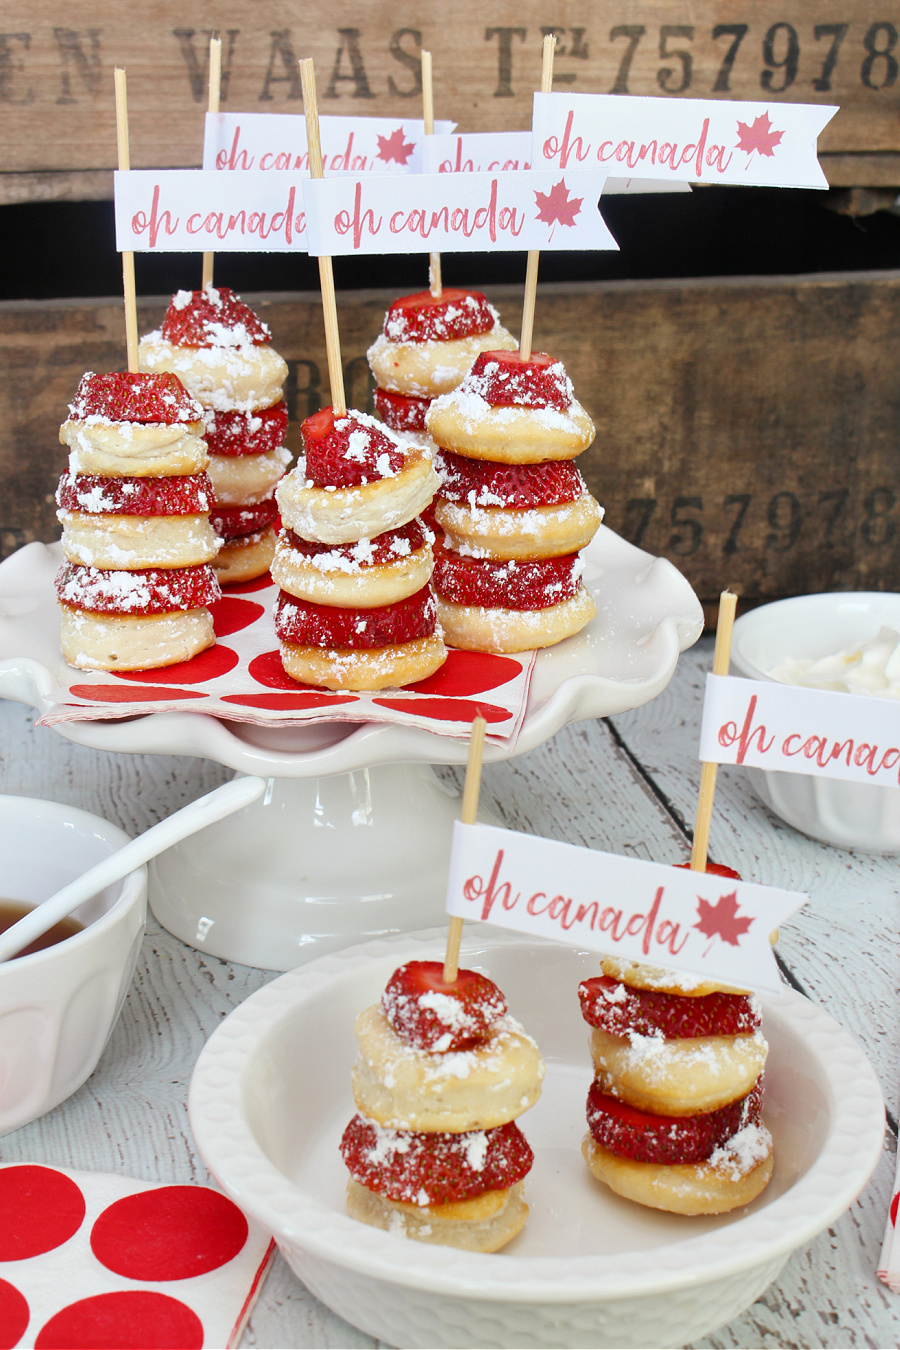 Strawberry shortcake on a stick with 'Oh Canada" dessert topper.